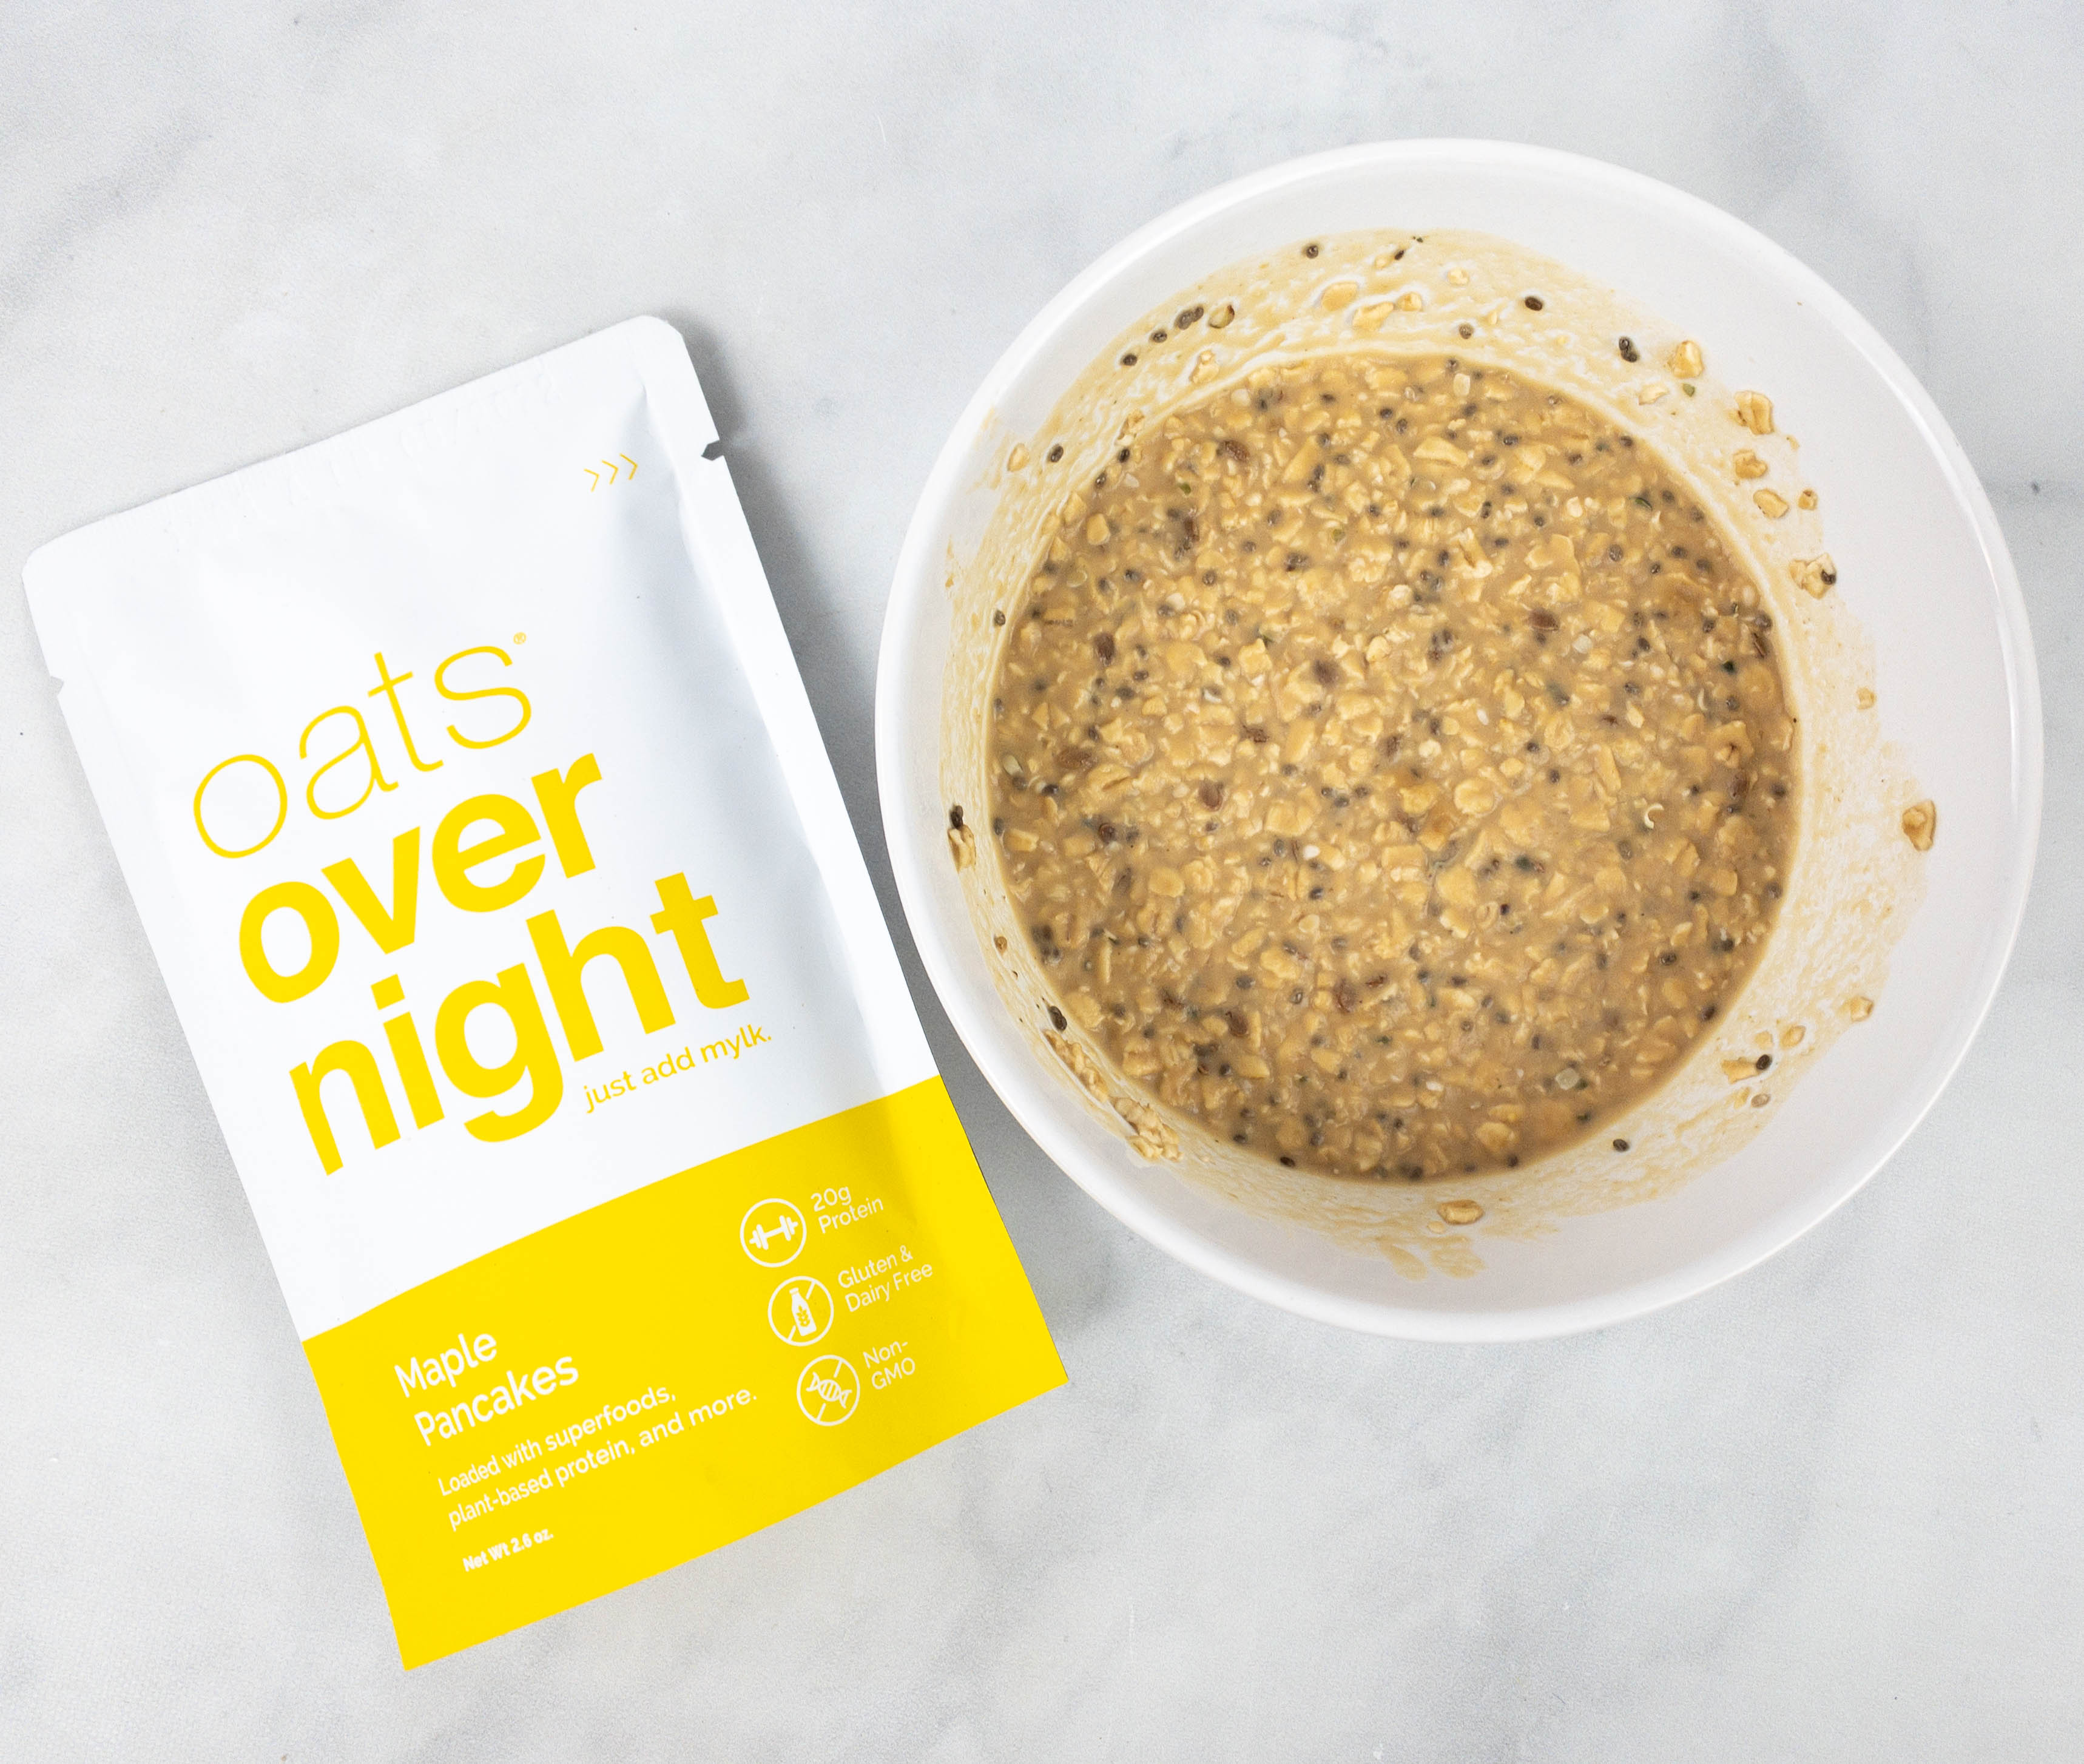 https://hellosubscription.com/wp-content/uploads/2021/05/oats-overnight-review-22.jpg?quality=90&strip=all